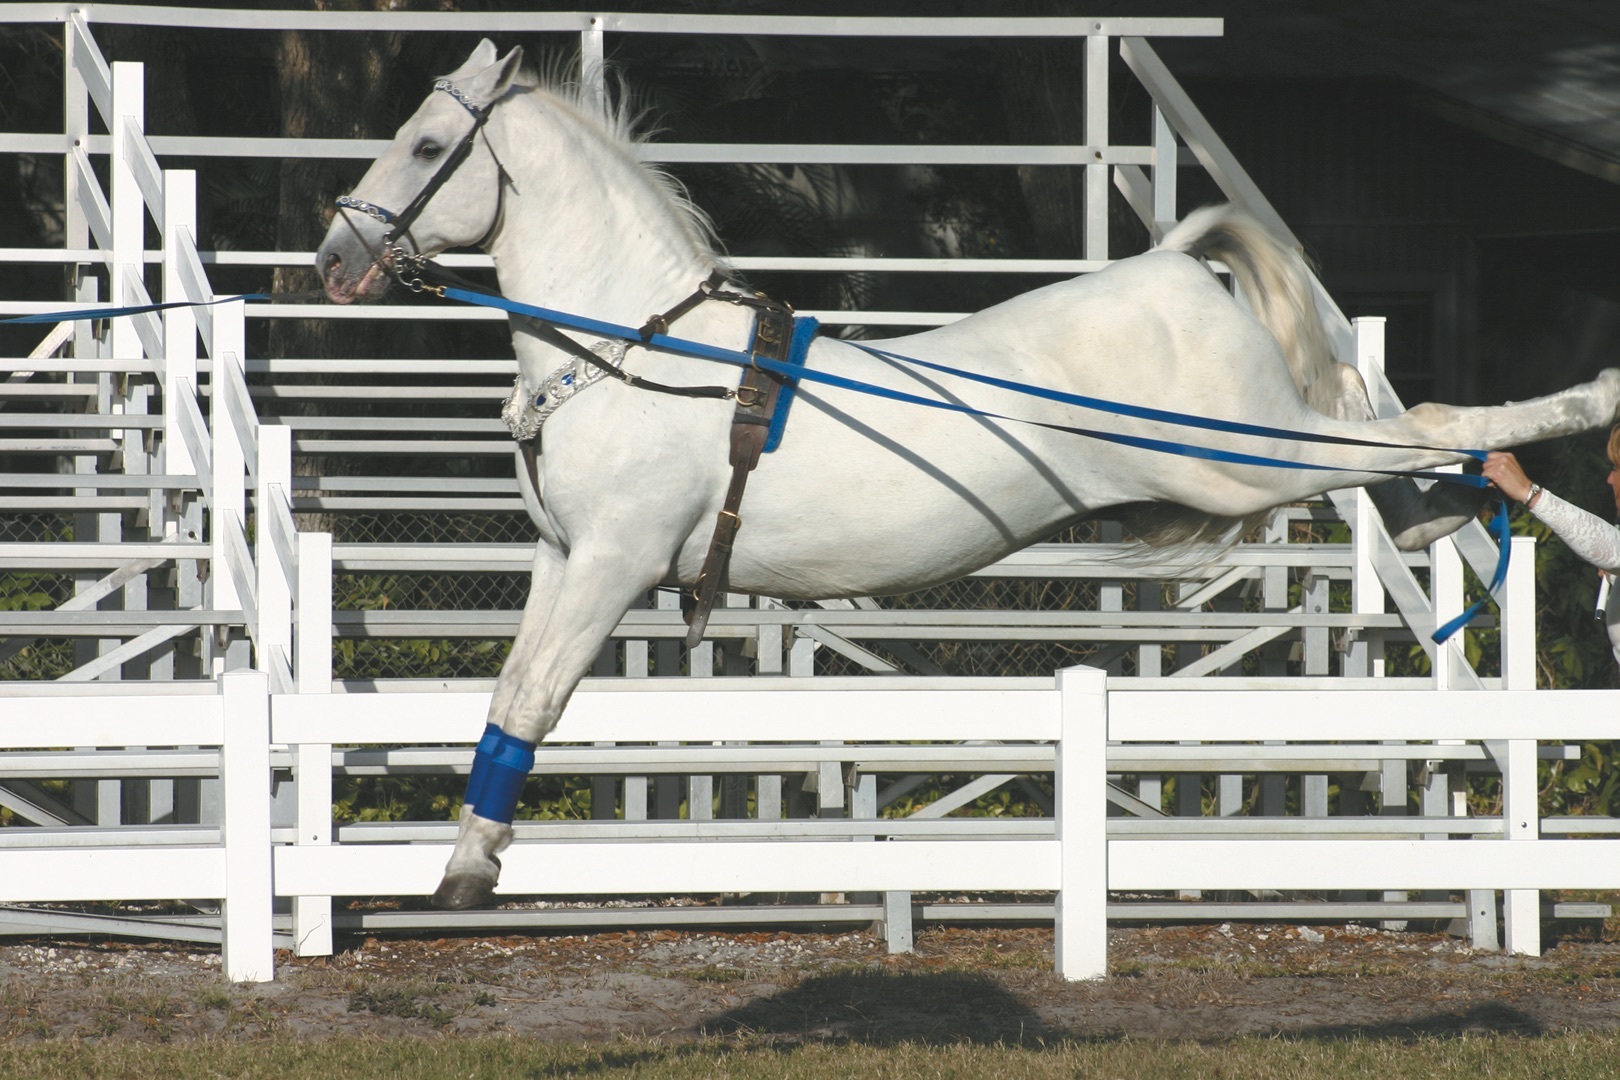 A Lipizzan performs a capriole, during which it jumps up and kicks straight back. When used during war, the force of a capriole could decapitate an opponent.